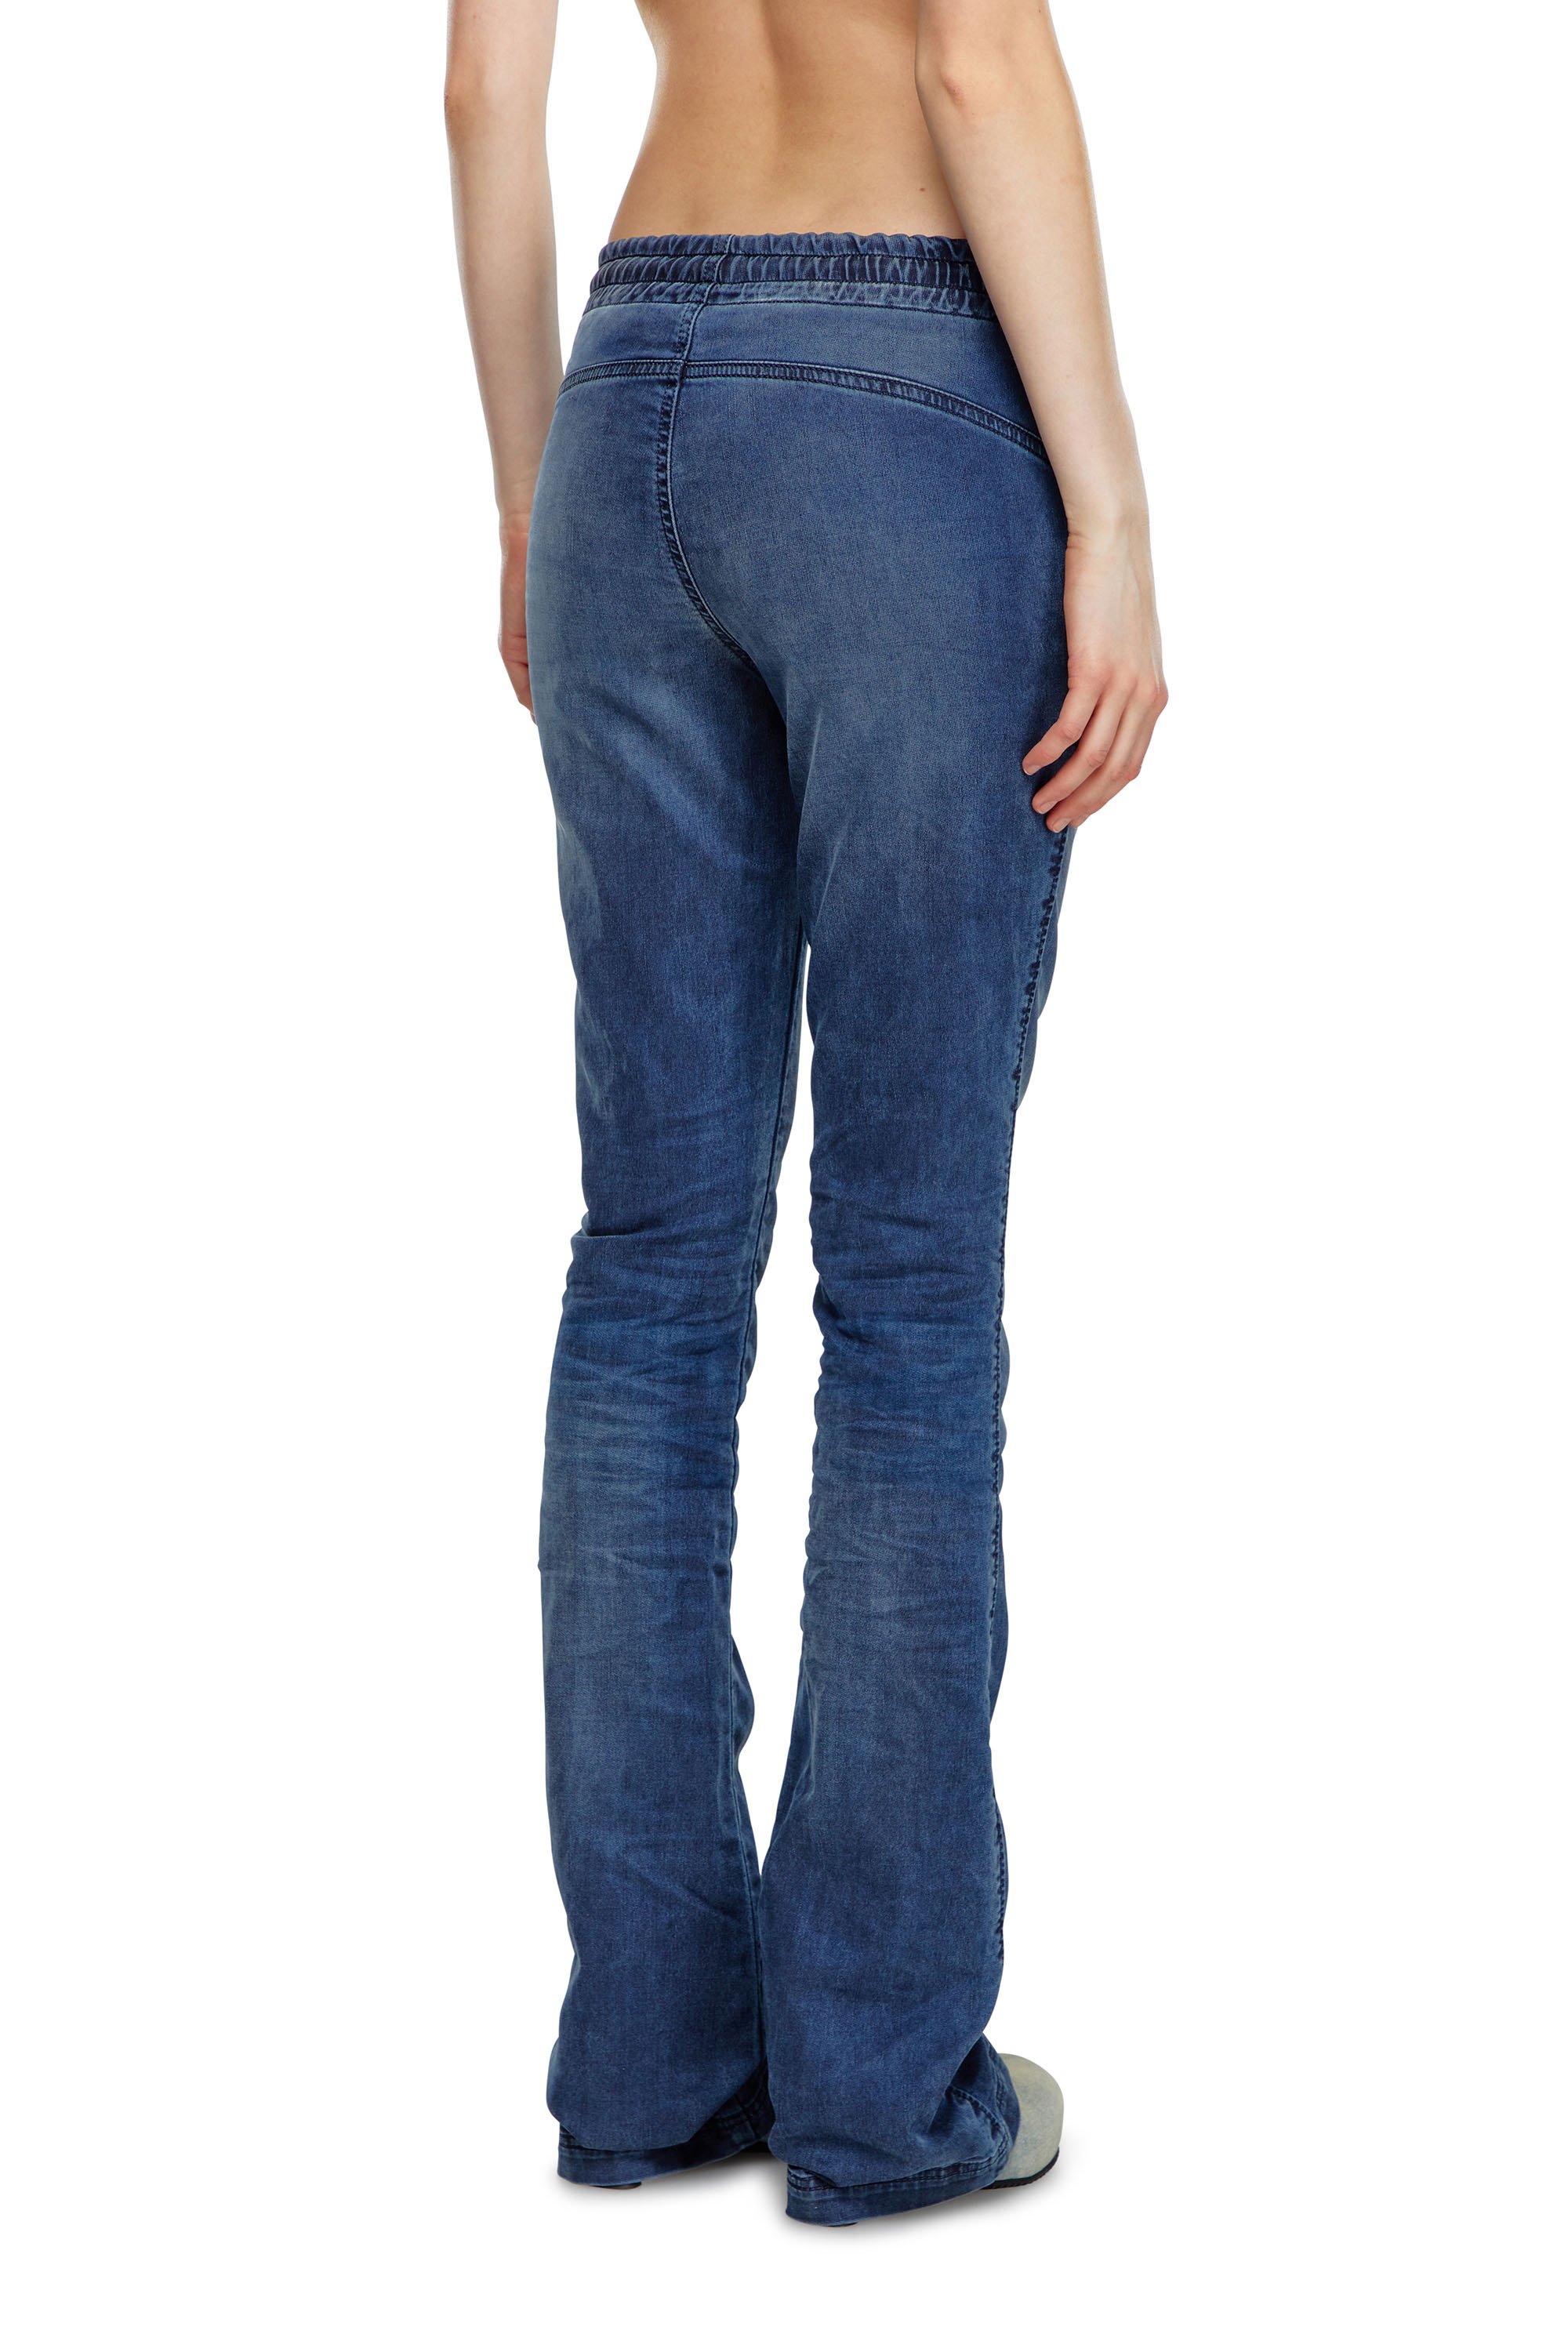 Diesel - Bootcut and Flare 2069 D-Ebbey Joggjeans® 068LX, Mujer Bootcut y Flare 2069 D-Ebbey Joggjeans® in Azul marino - Image 3